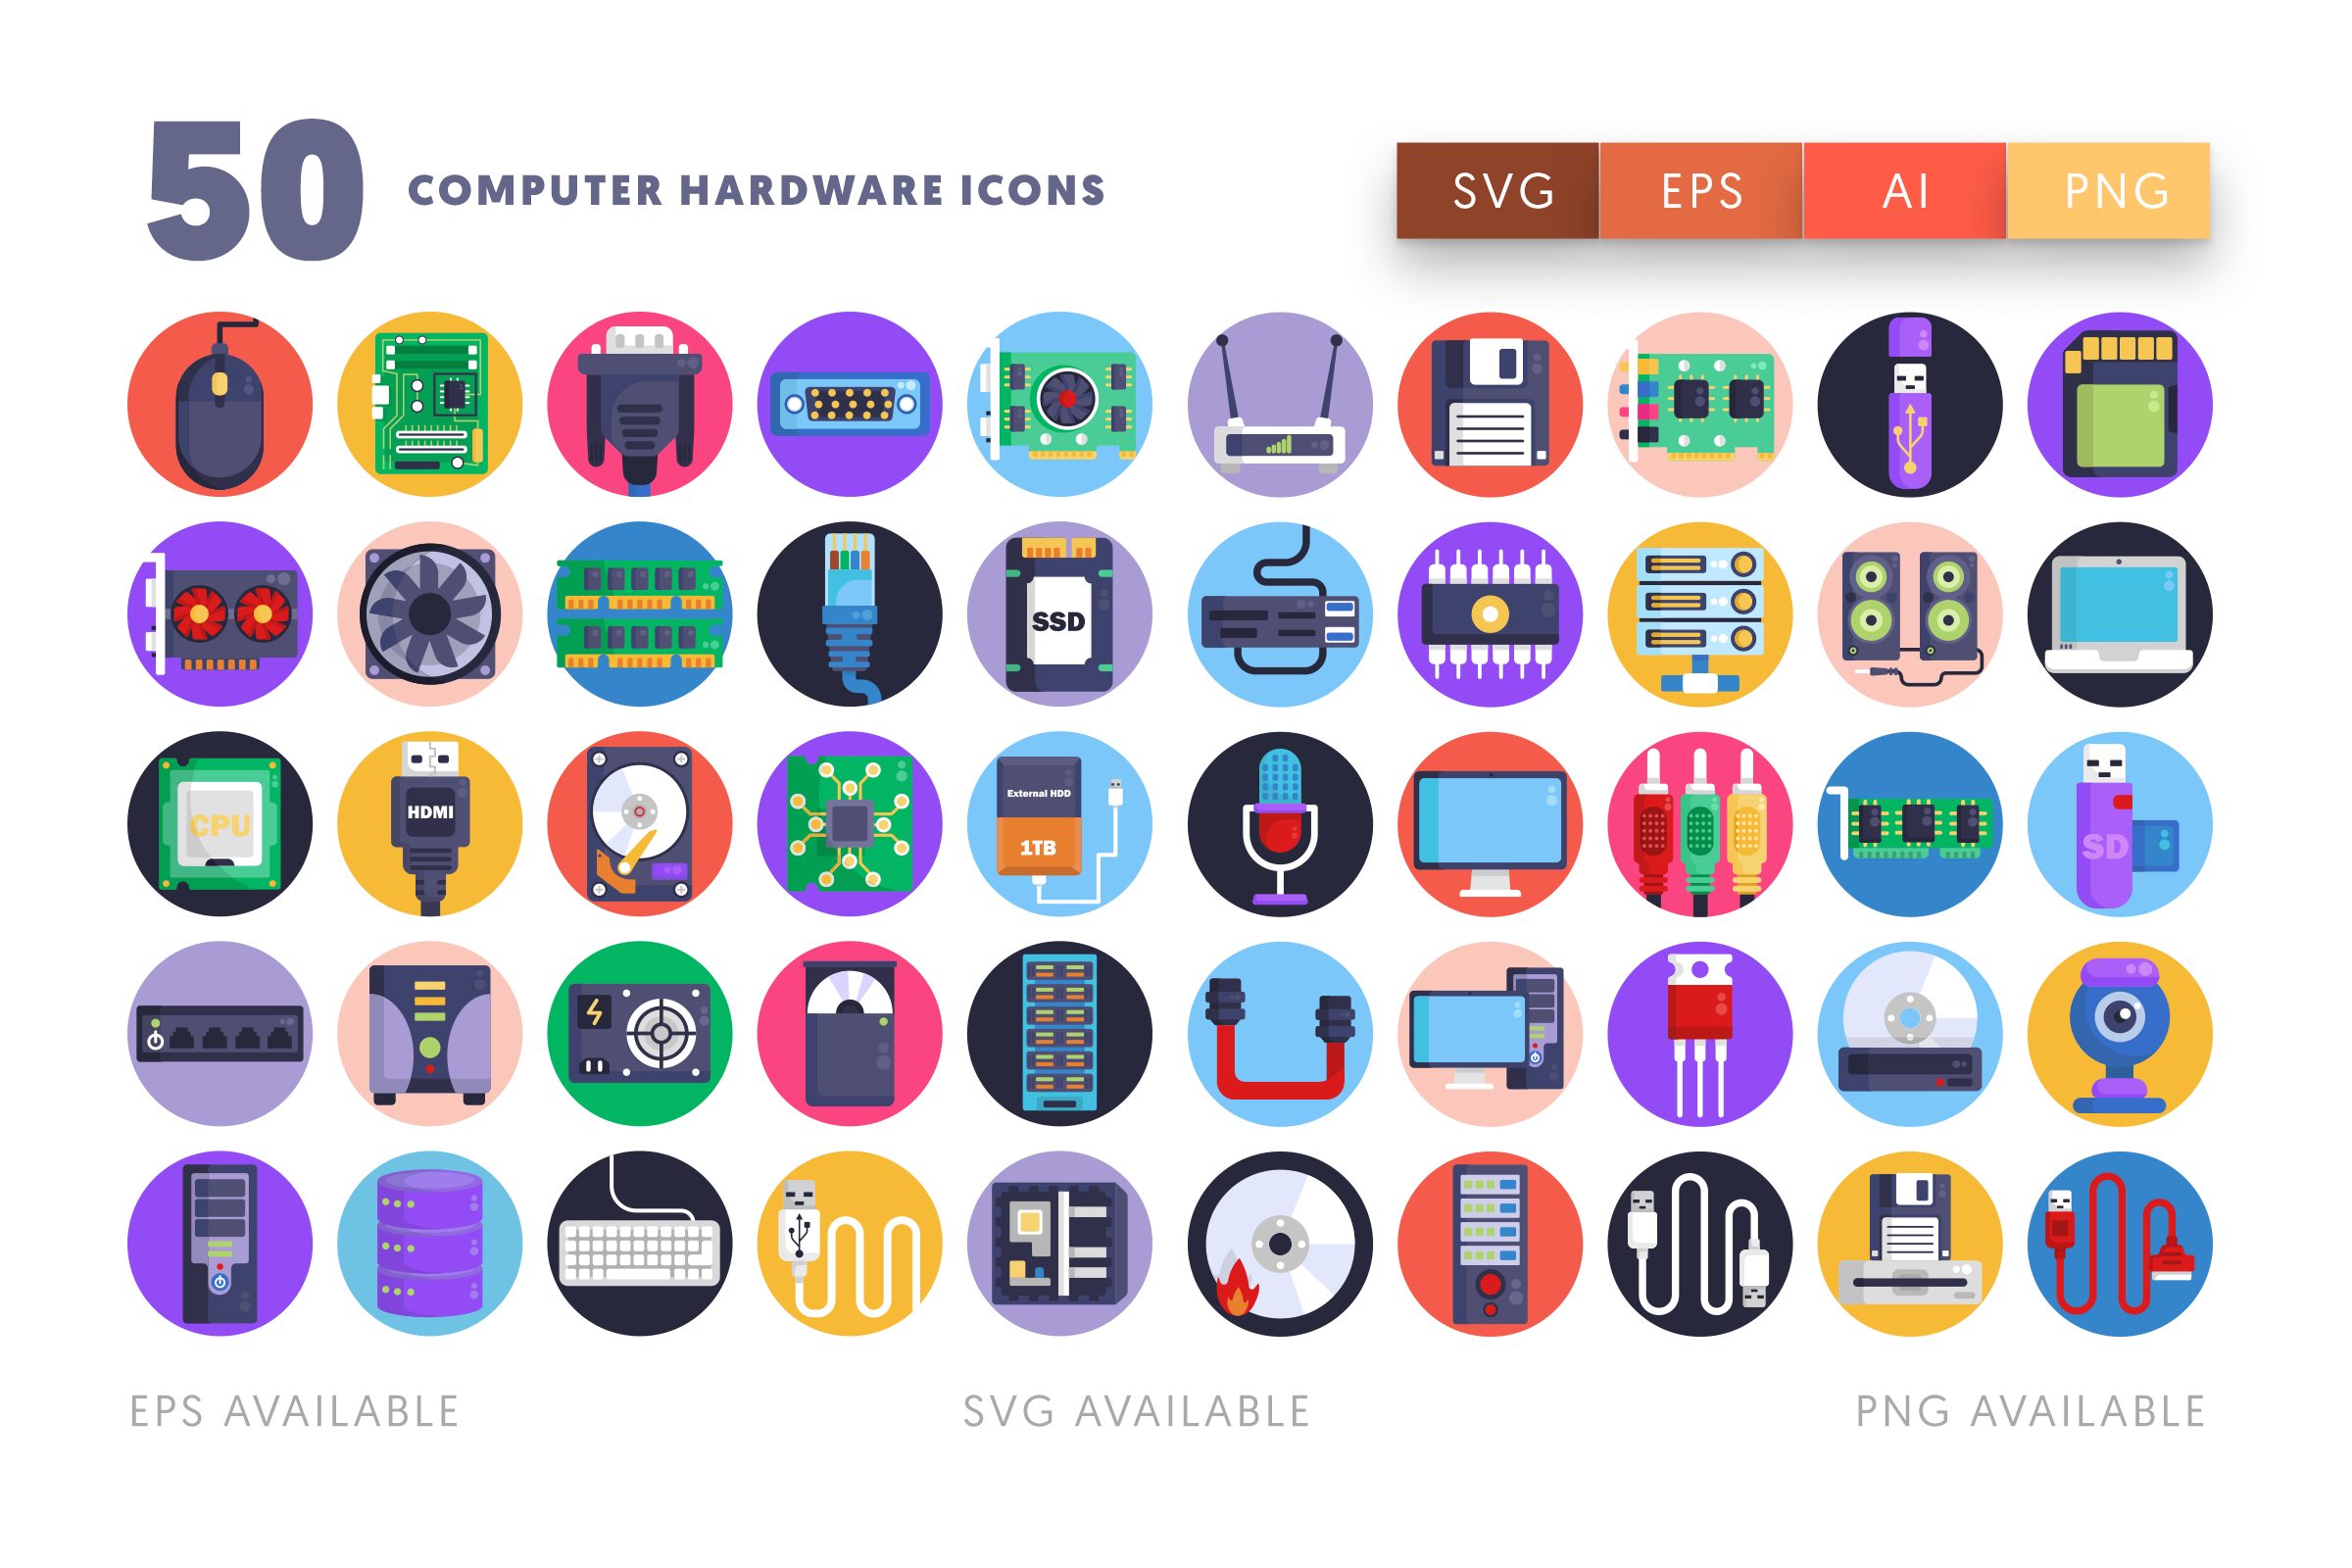 Computer Hardware icons png/svg/eps